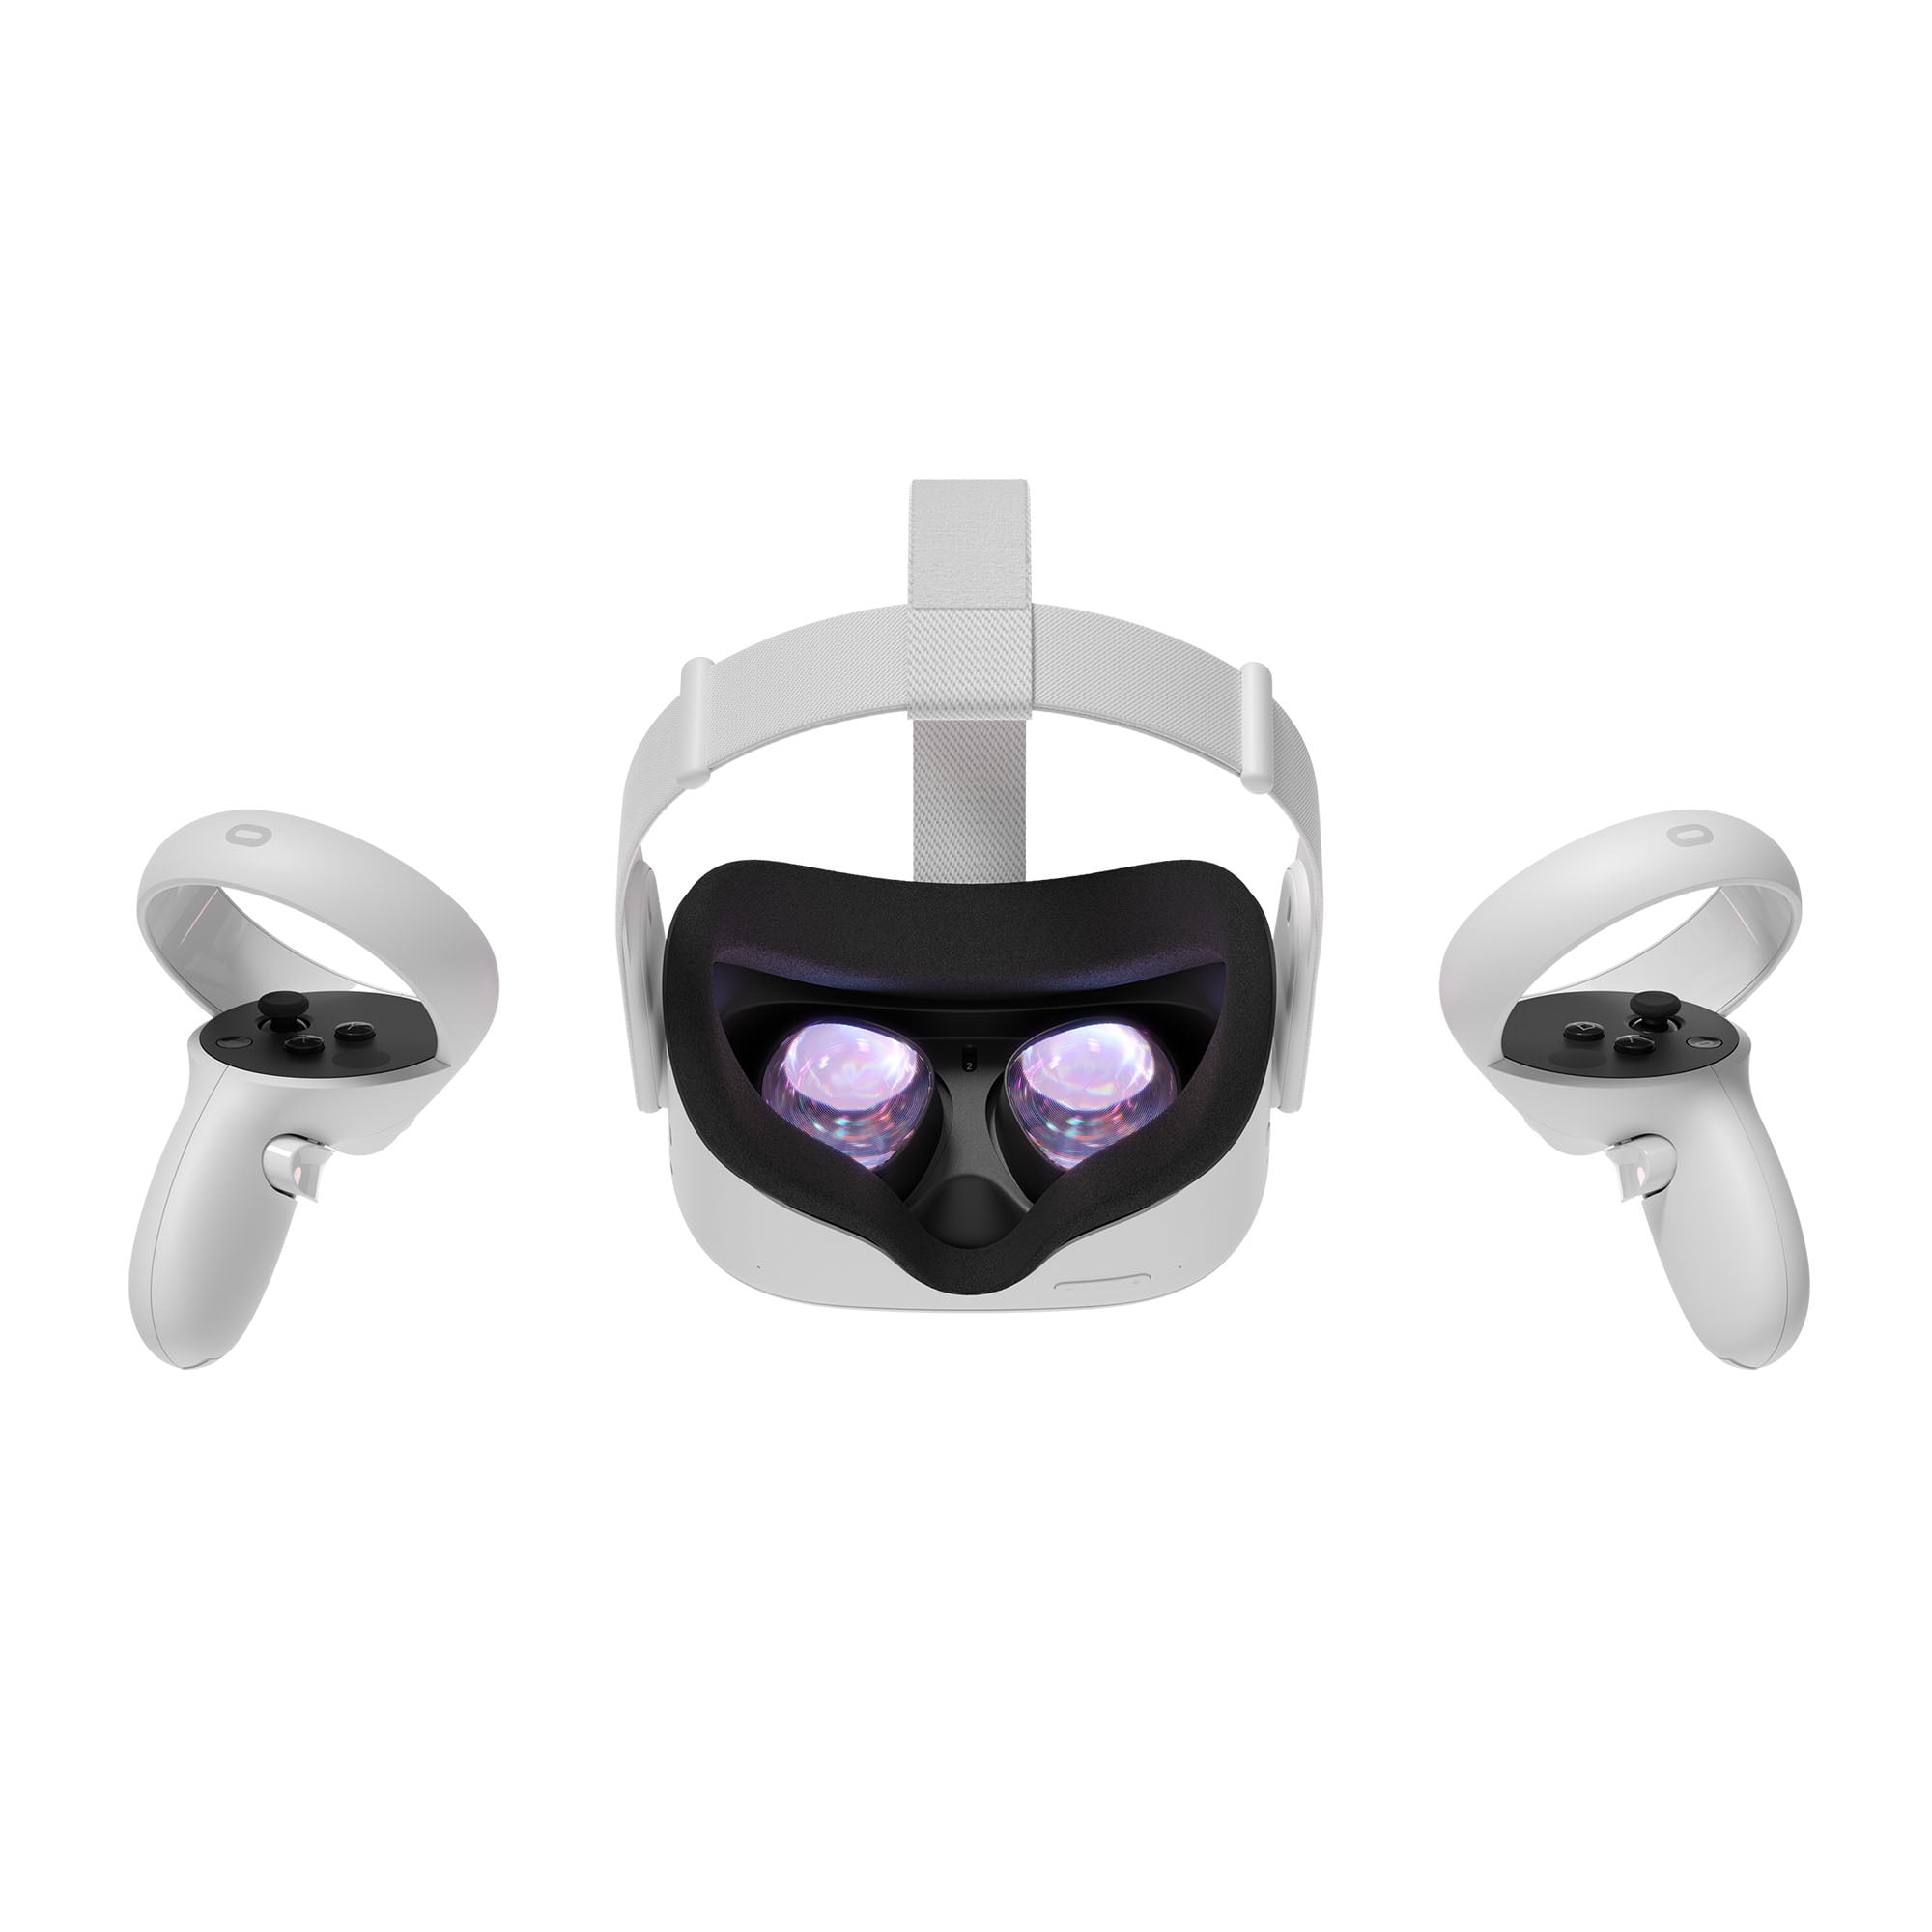 Meta Oculus Quest 2 64GB - Advanced All-In-One Virtual Reality Headset